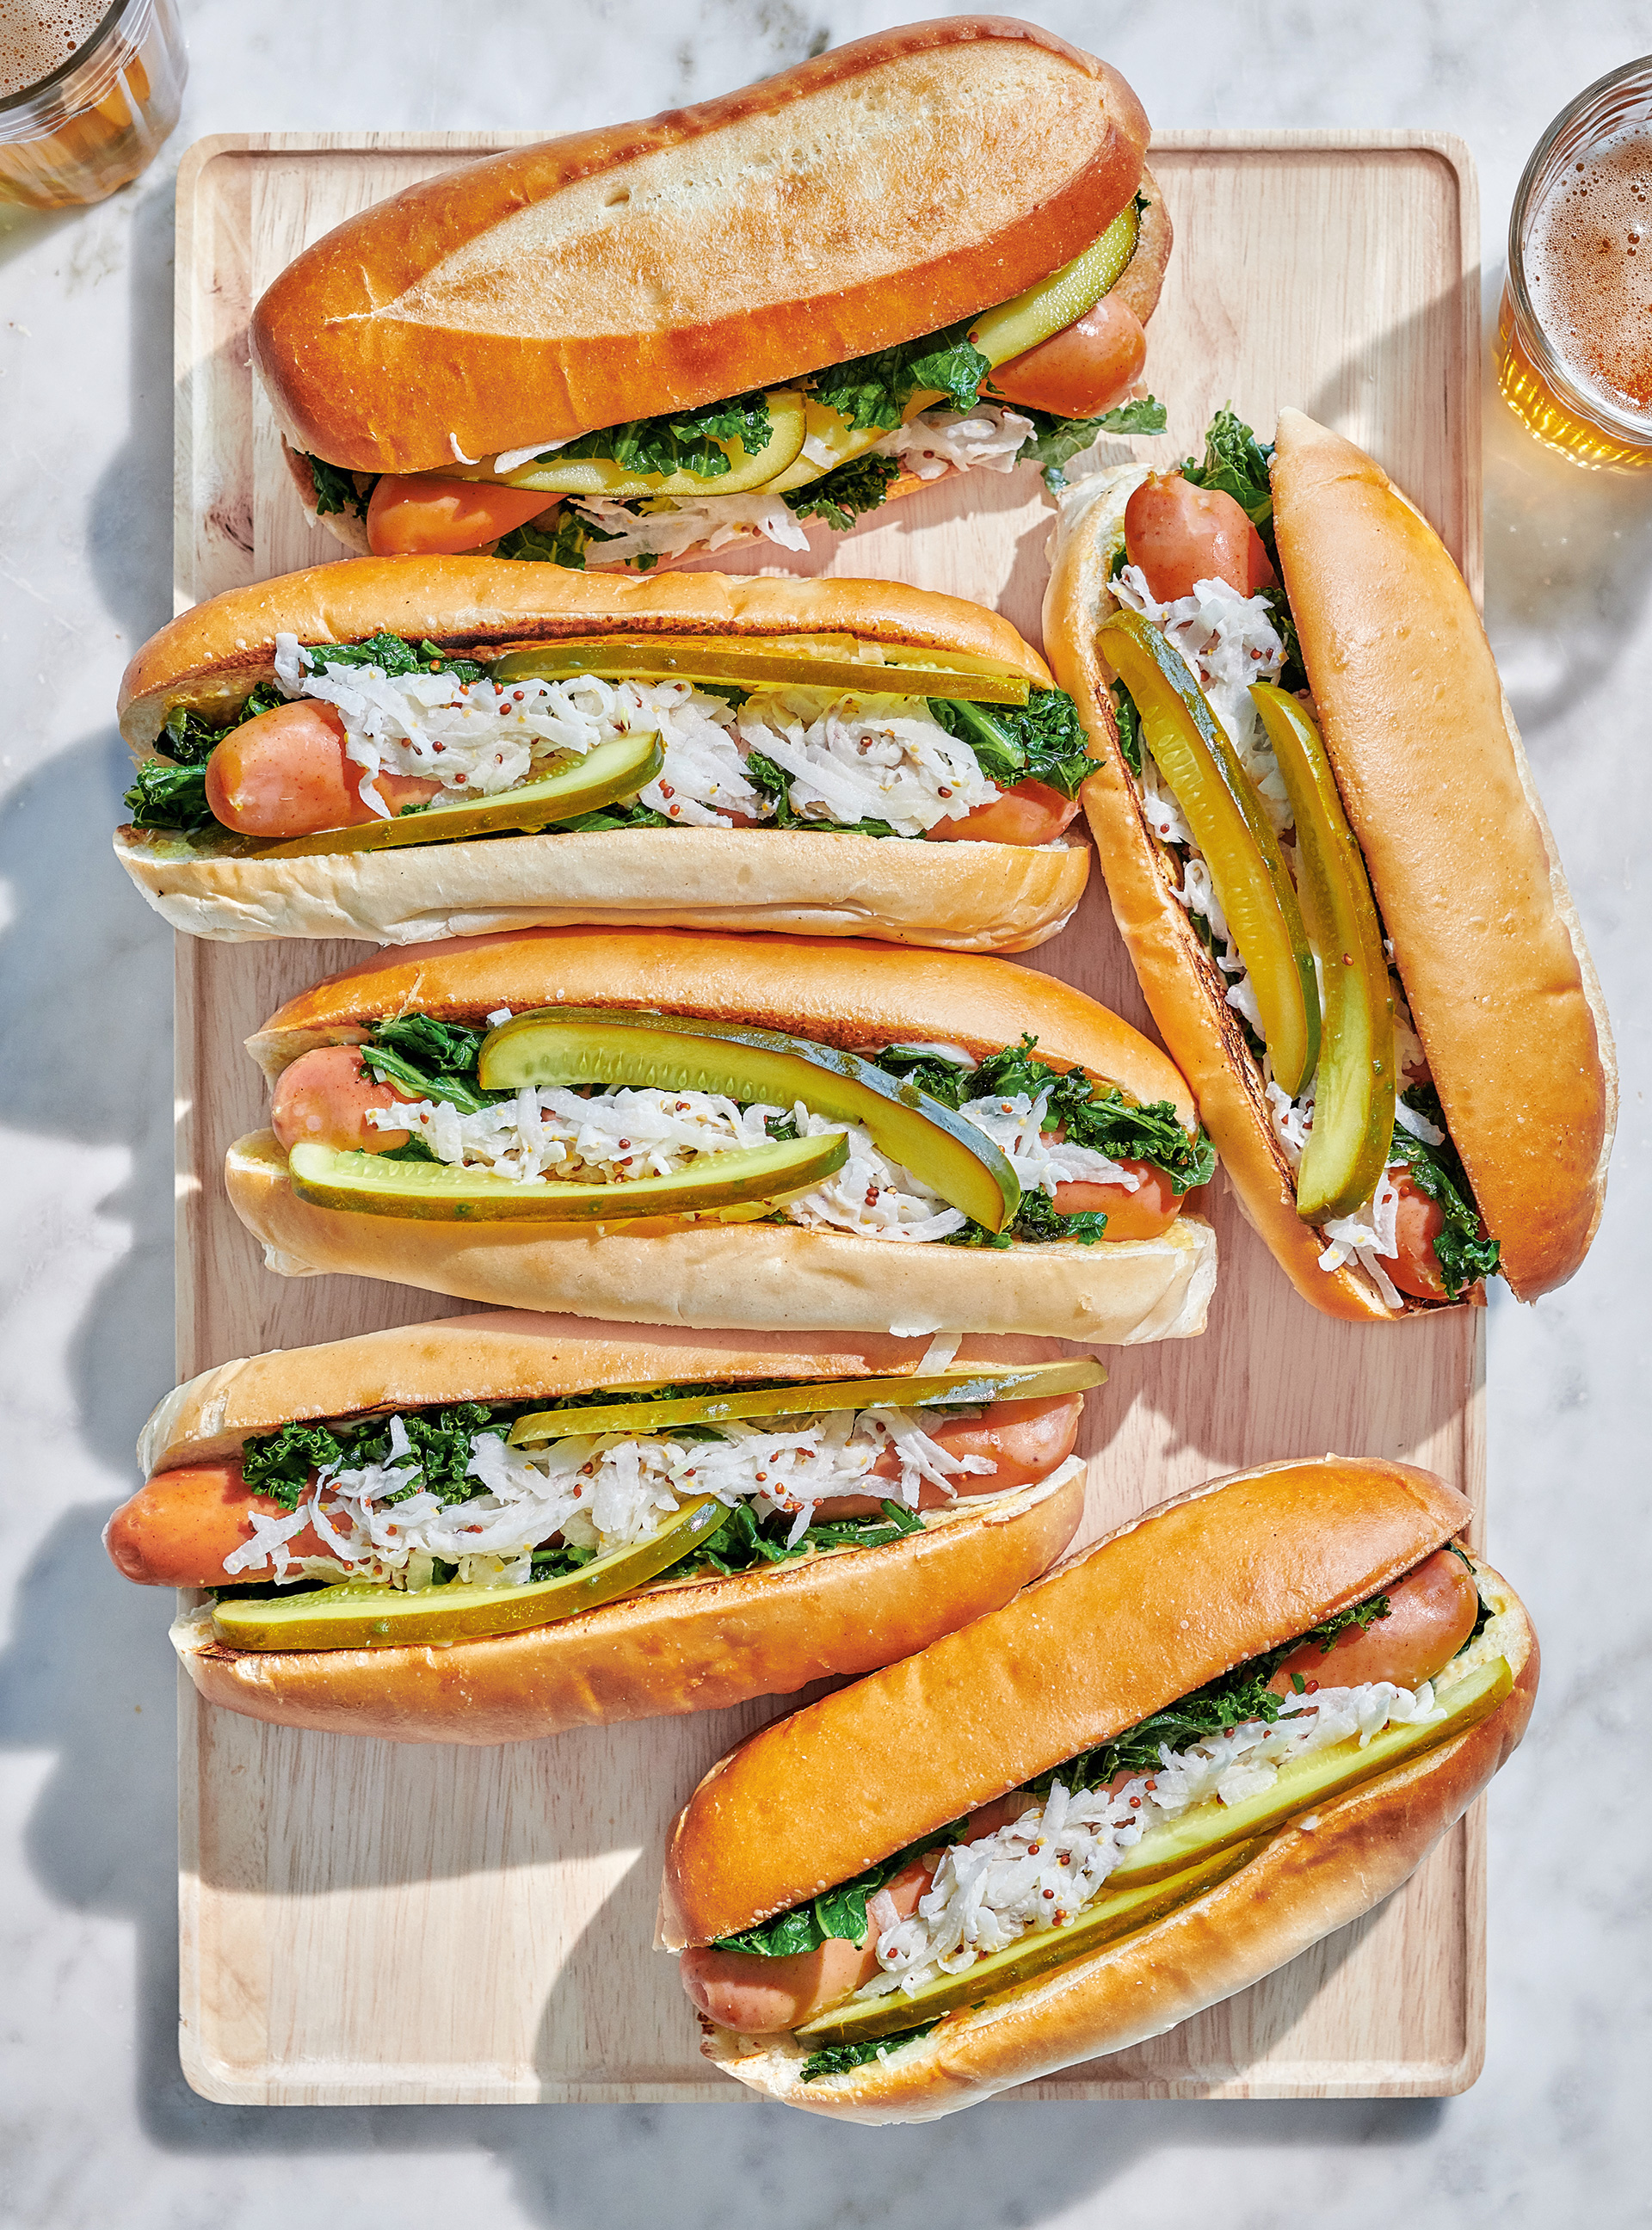 Hot Dogs with Kale and Turnip Remoulade